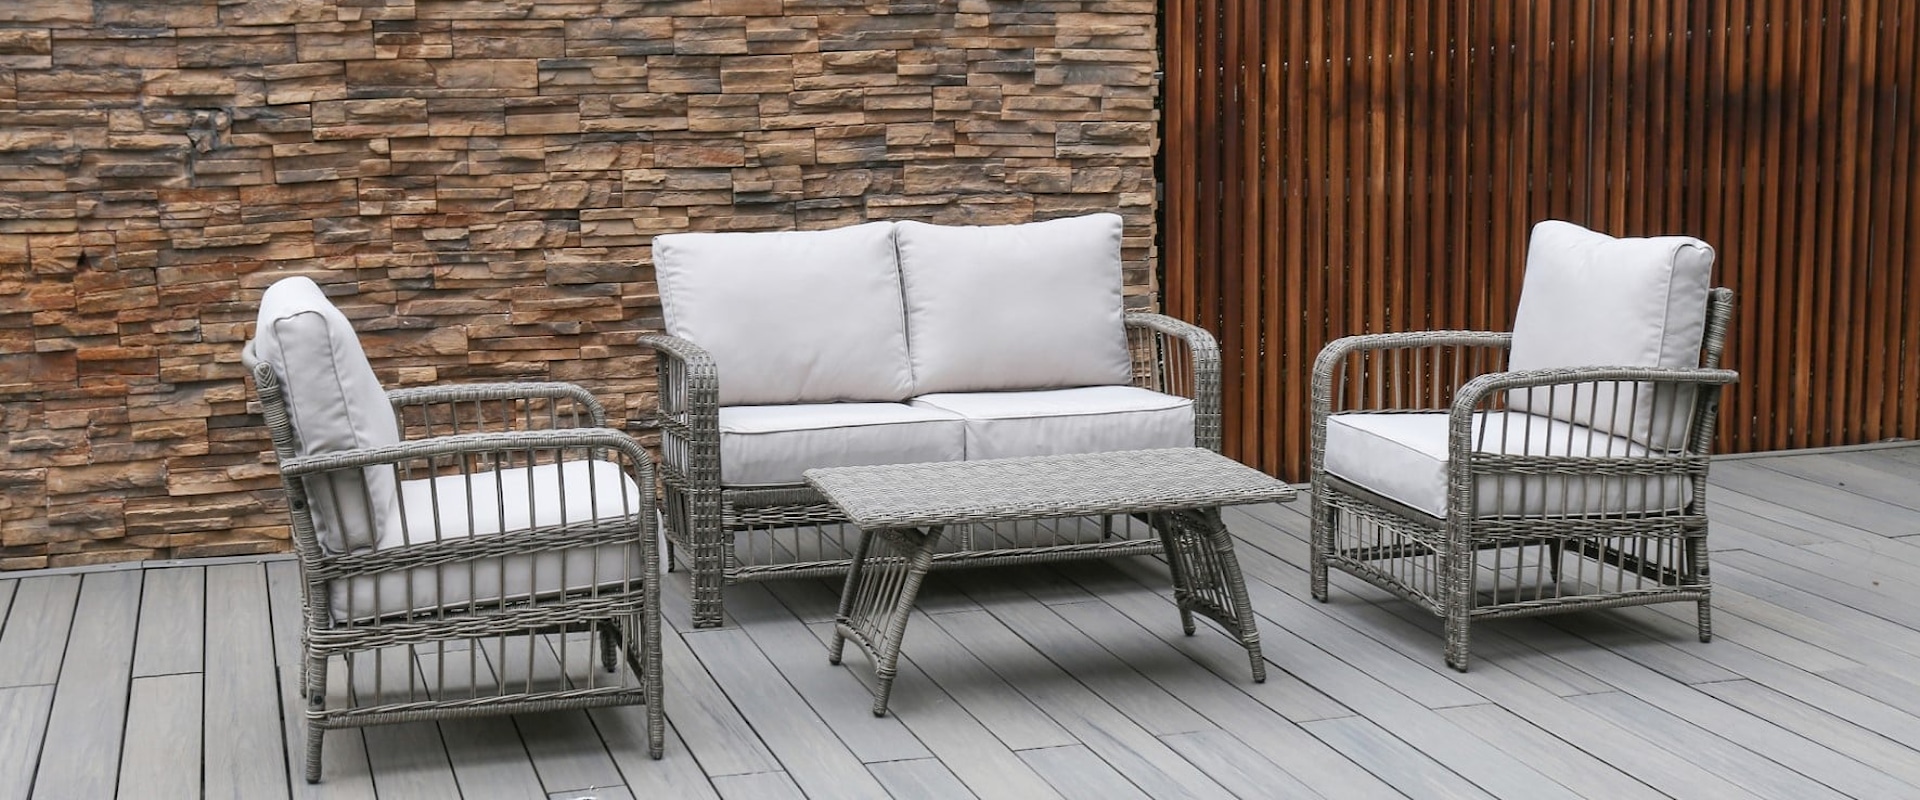 Clarice Outdoor Chat Set